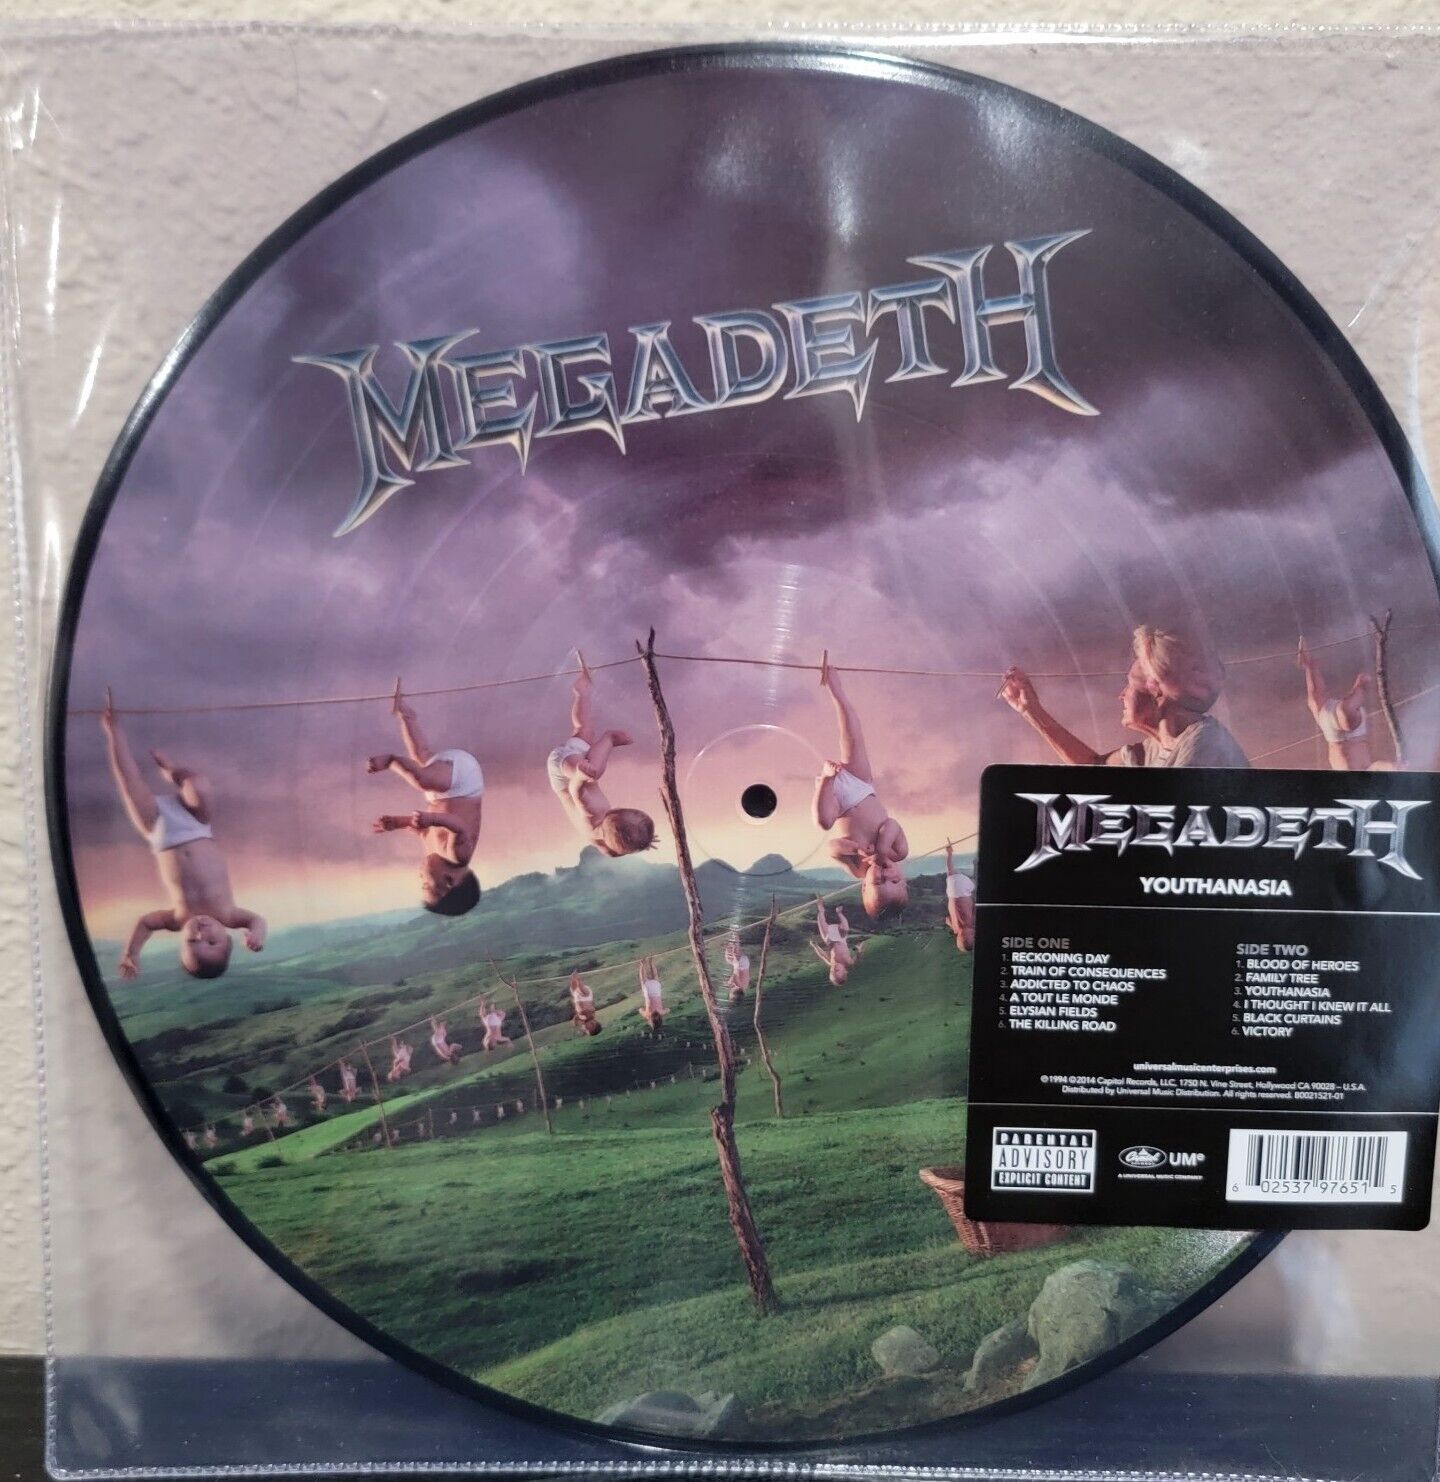 Factory Sealed Megadeth Youthanasia Picture Disc Vinyl LP....